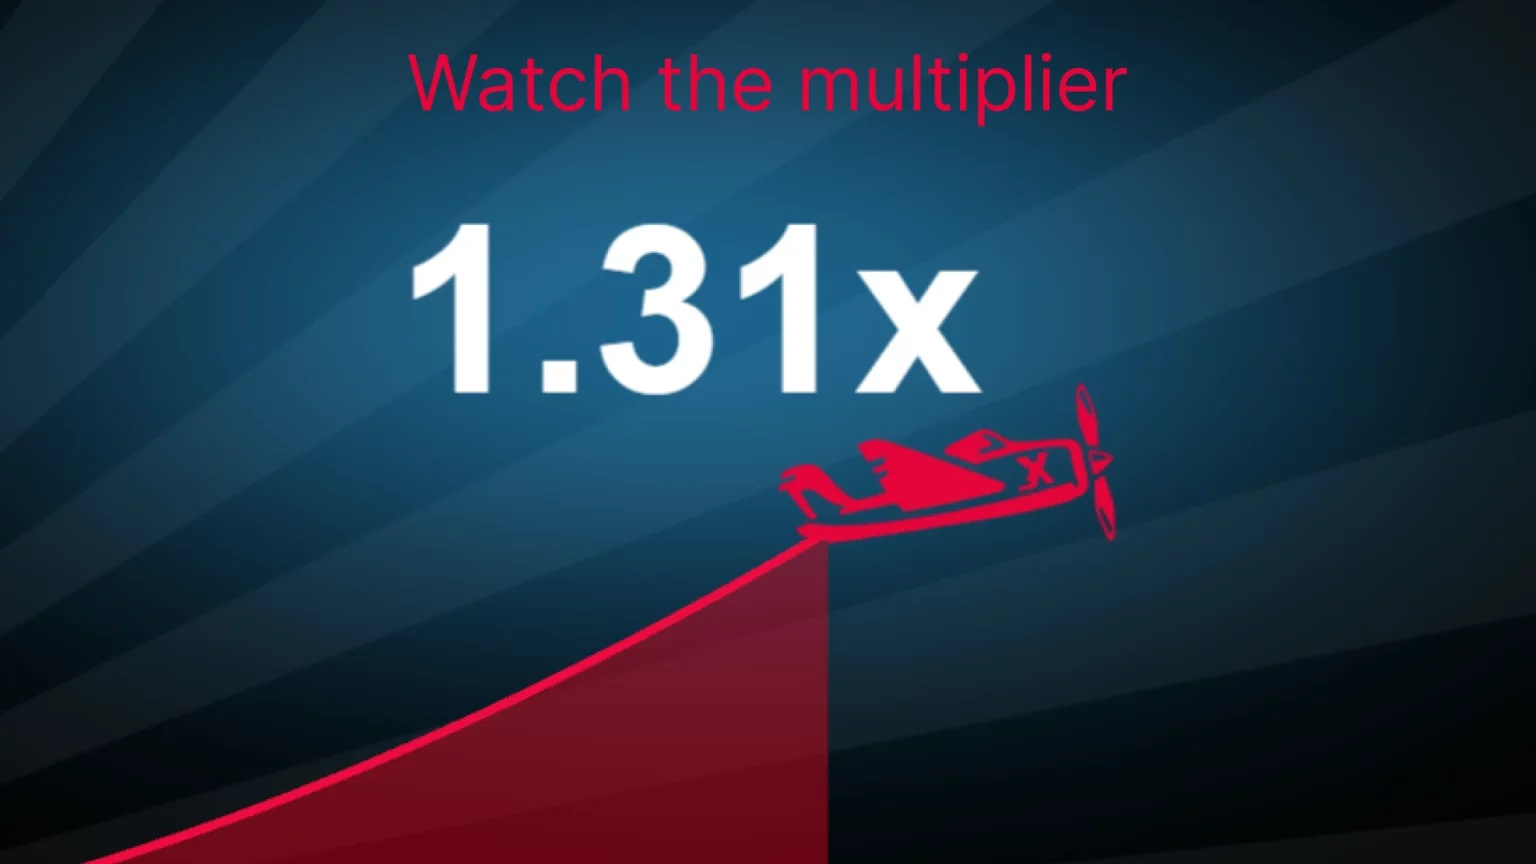 game-rules-watch-multiplier-1536x864